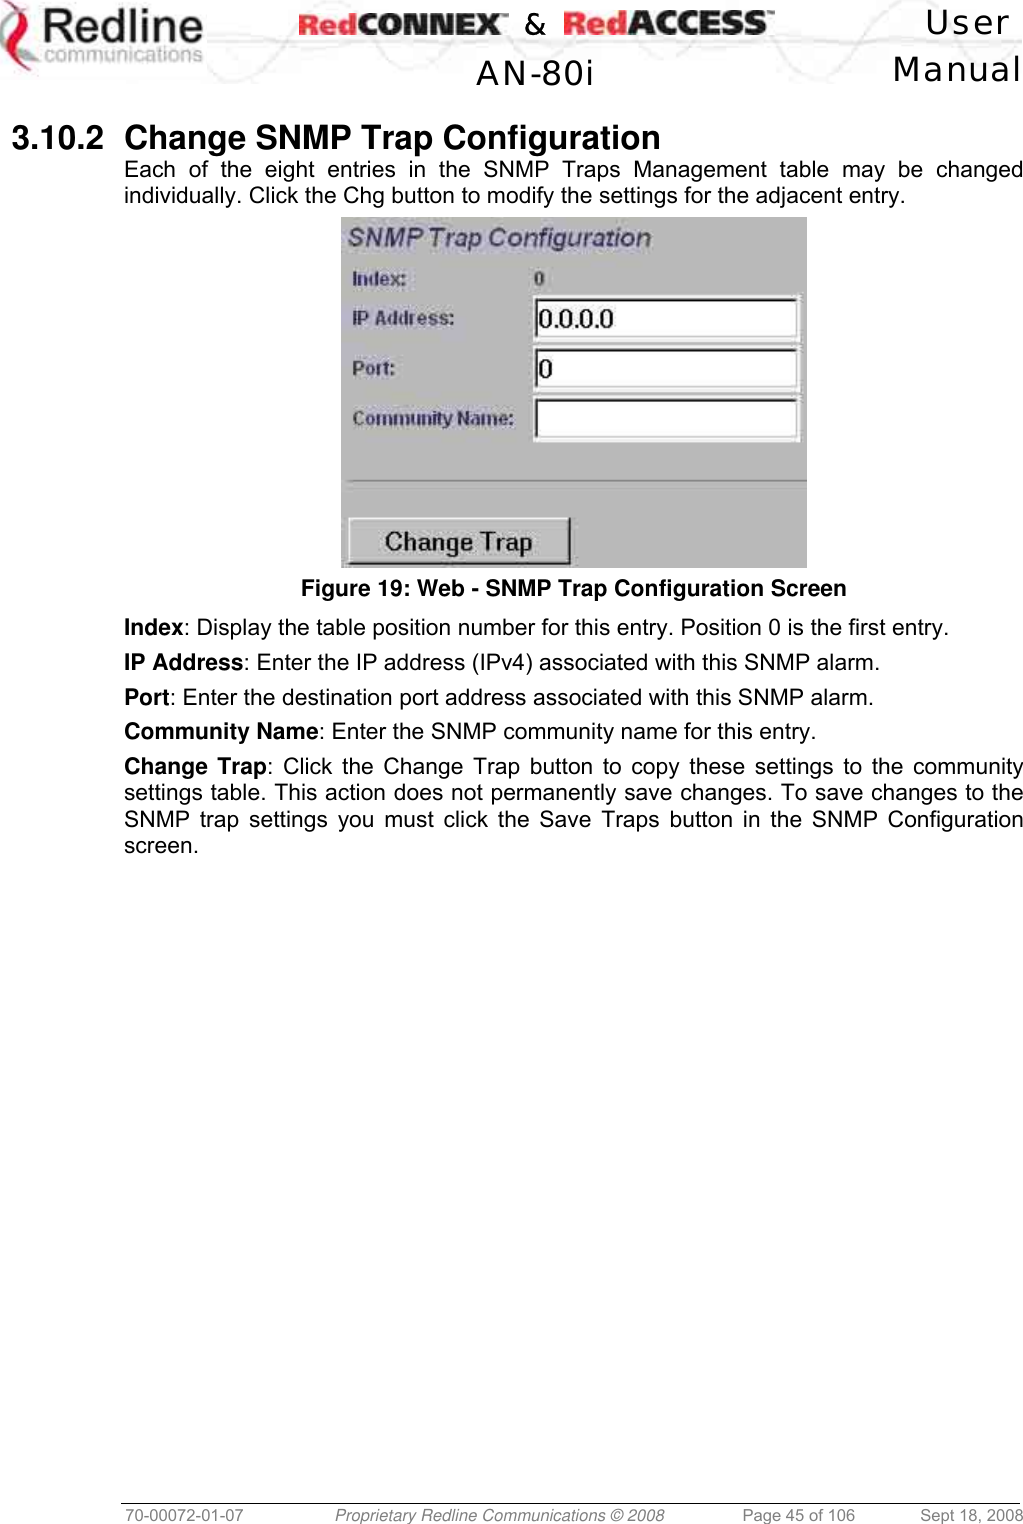    &amp;  User  AN-80i Manual  70-00072-01-07  Proprietary Redline Communications © 2008  Page 45 of 106  Sept 18, 2008  3.10.2  Change SNMP Trap Configuration Each of the eight entries in the SNMP Traps Management table may be changed individually. Click the Chg button to modify the settings for the adjacent entry.  Figure 19: Web - SNMP Trap Configuration Screen  Index: Display the table position number for this entry. Position 0 is the first entry. IP Address: Enter the IP address (IPv4) associated with this SNMP alarm. Port: Enter the destination port address associated with this SNMP alarm. Community Name: Enter the SNMP community name for this entry. Change Trap: Click the Change Trap button to copy these settings to the community settings table. This action does not permanently save changes. To save changes to the SNMP trap settings you must click the Save Traps button in the SNMP Configuration screen. 